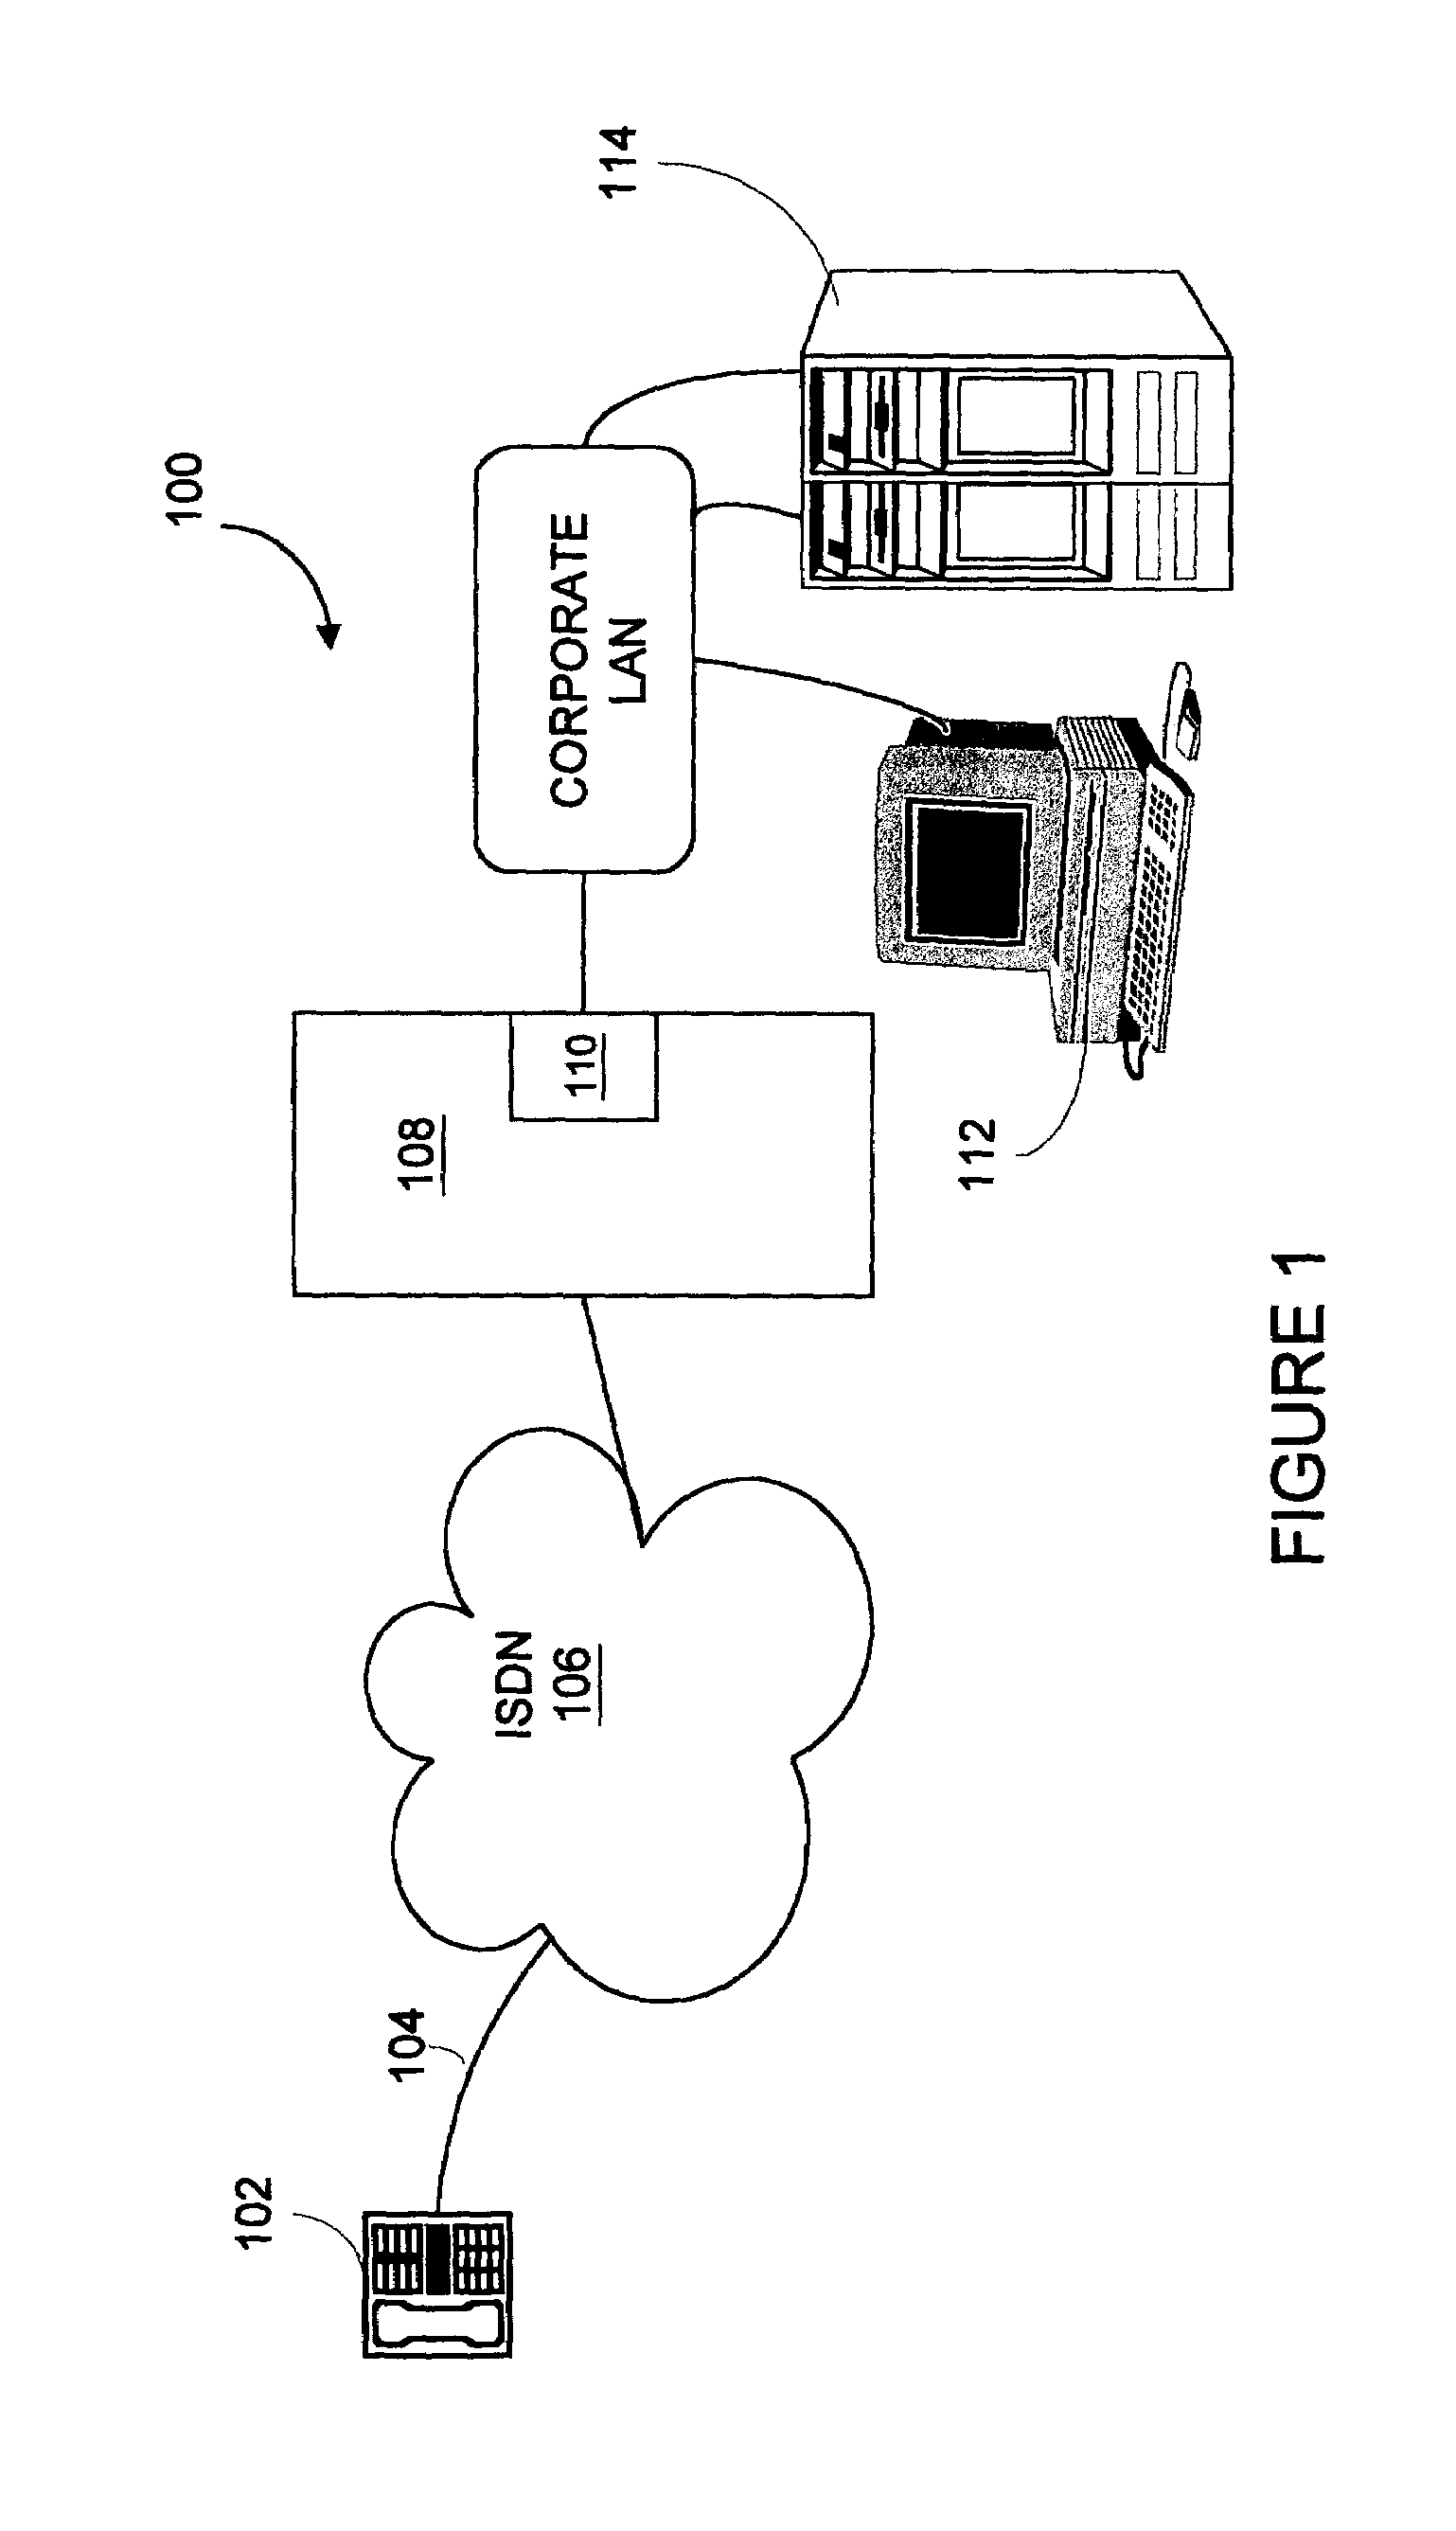 Method and apparatus for extending PBX features via the public network